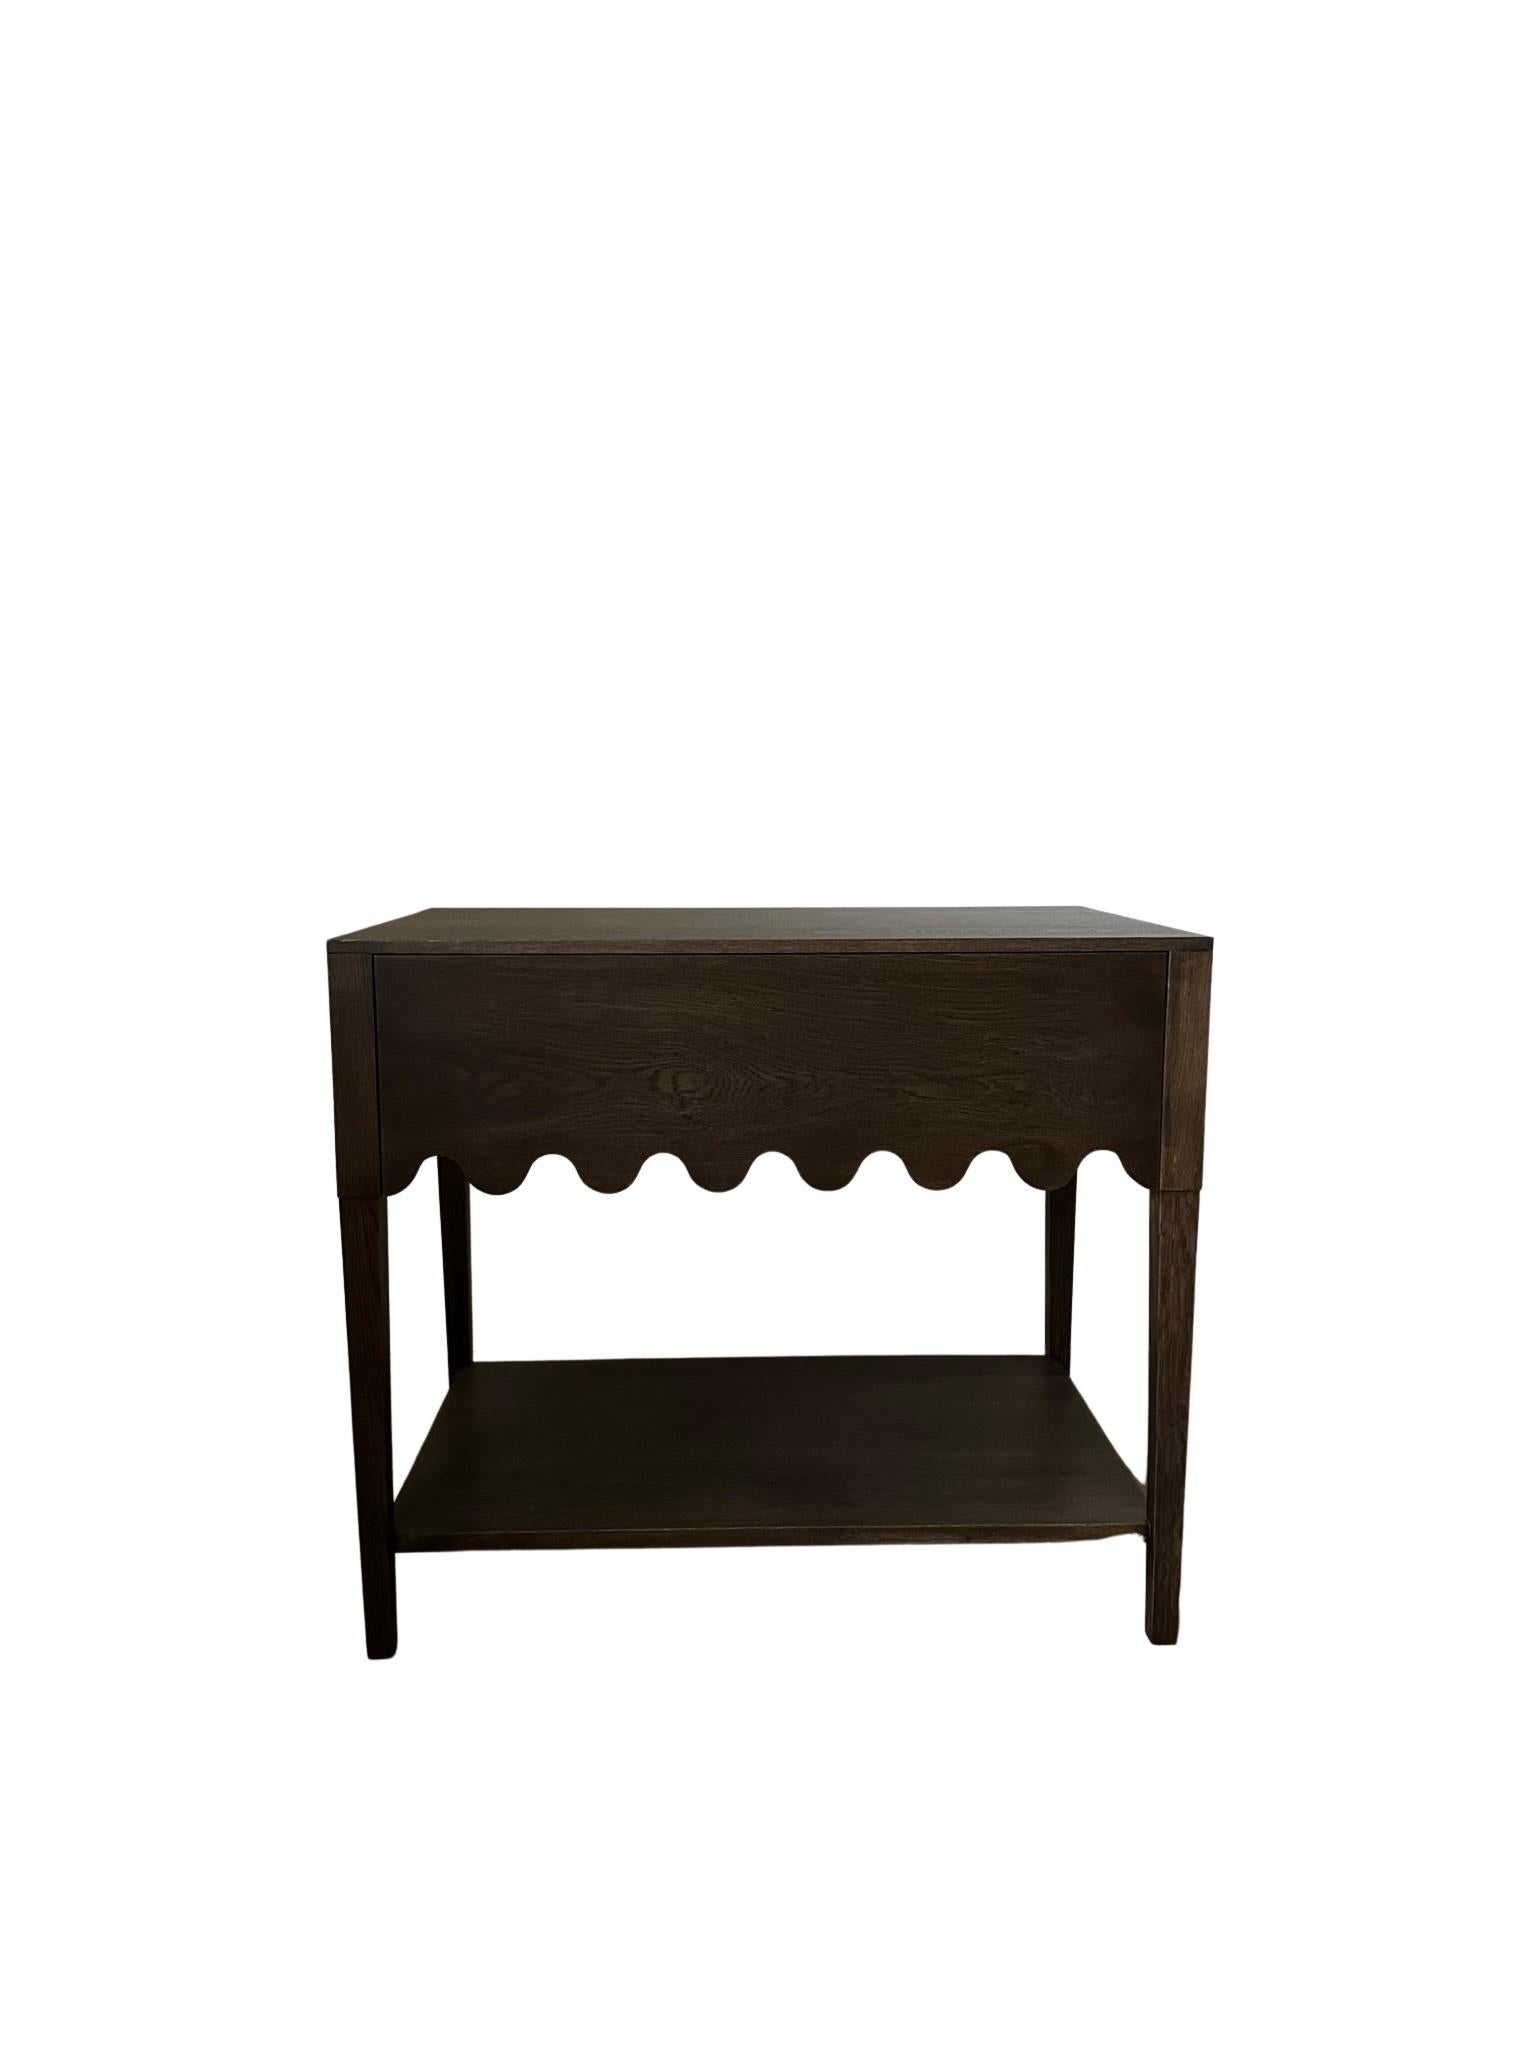 Hand-crafted with the highest quality of wood and designed with a scalloped drawer, the Charli Nightstand gives bespoke joinery a whole new meaning. This piece is delightfully versatile with a timeless quality we love. We designed this heirloom